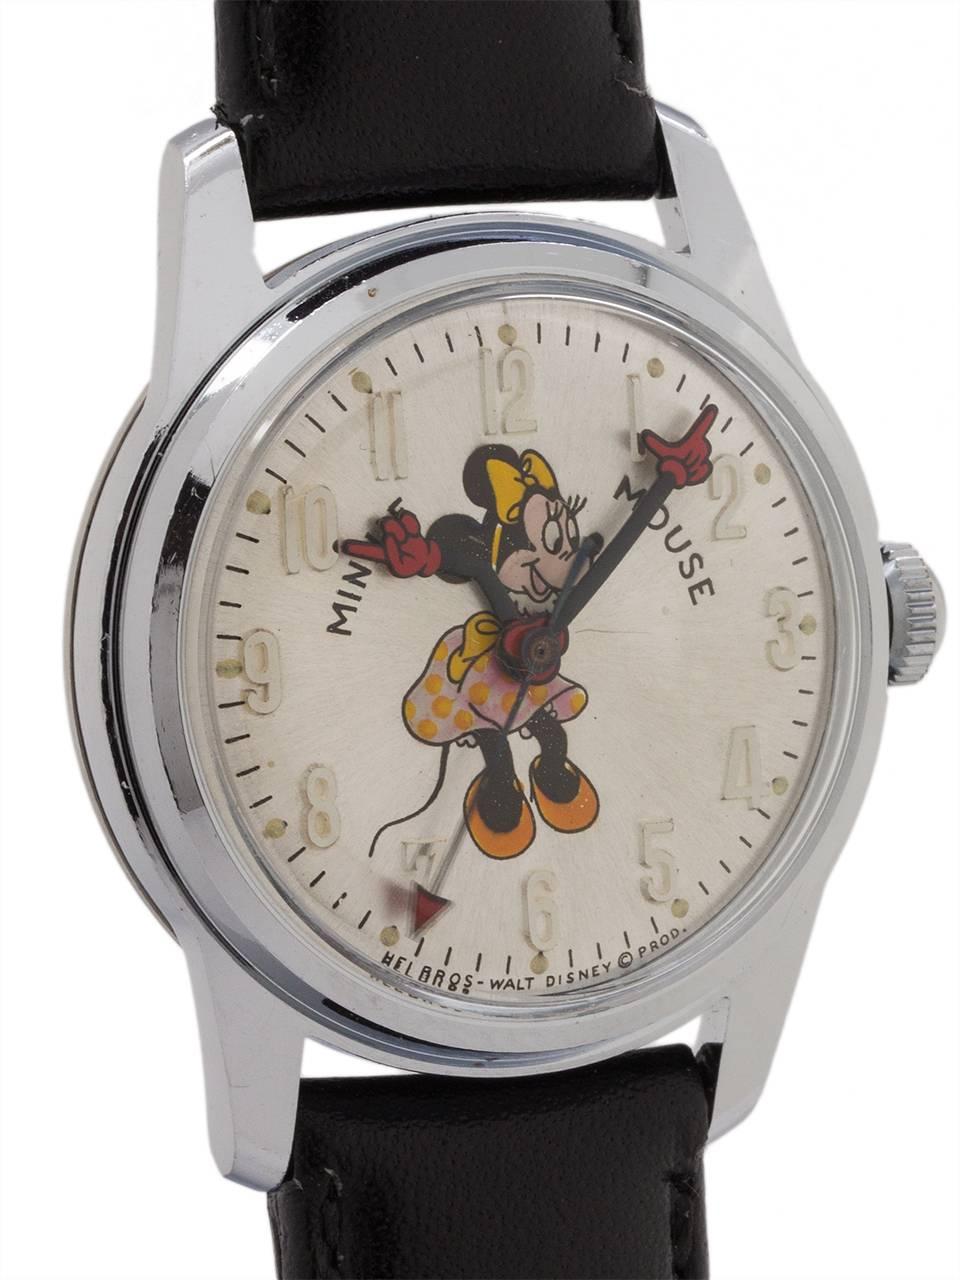 
Vintage medium size Helbros 17 jewel manual wind Minnie Mouse watch circa 1970’s. Featuring 31mm diameter chromium plated case with steel screw down back, with acrylic crystal, and with excellent condition original dial with polychrome depiction of